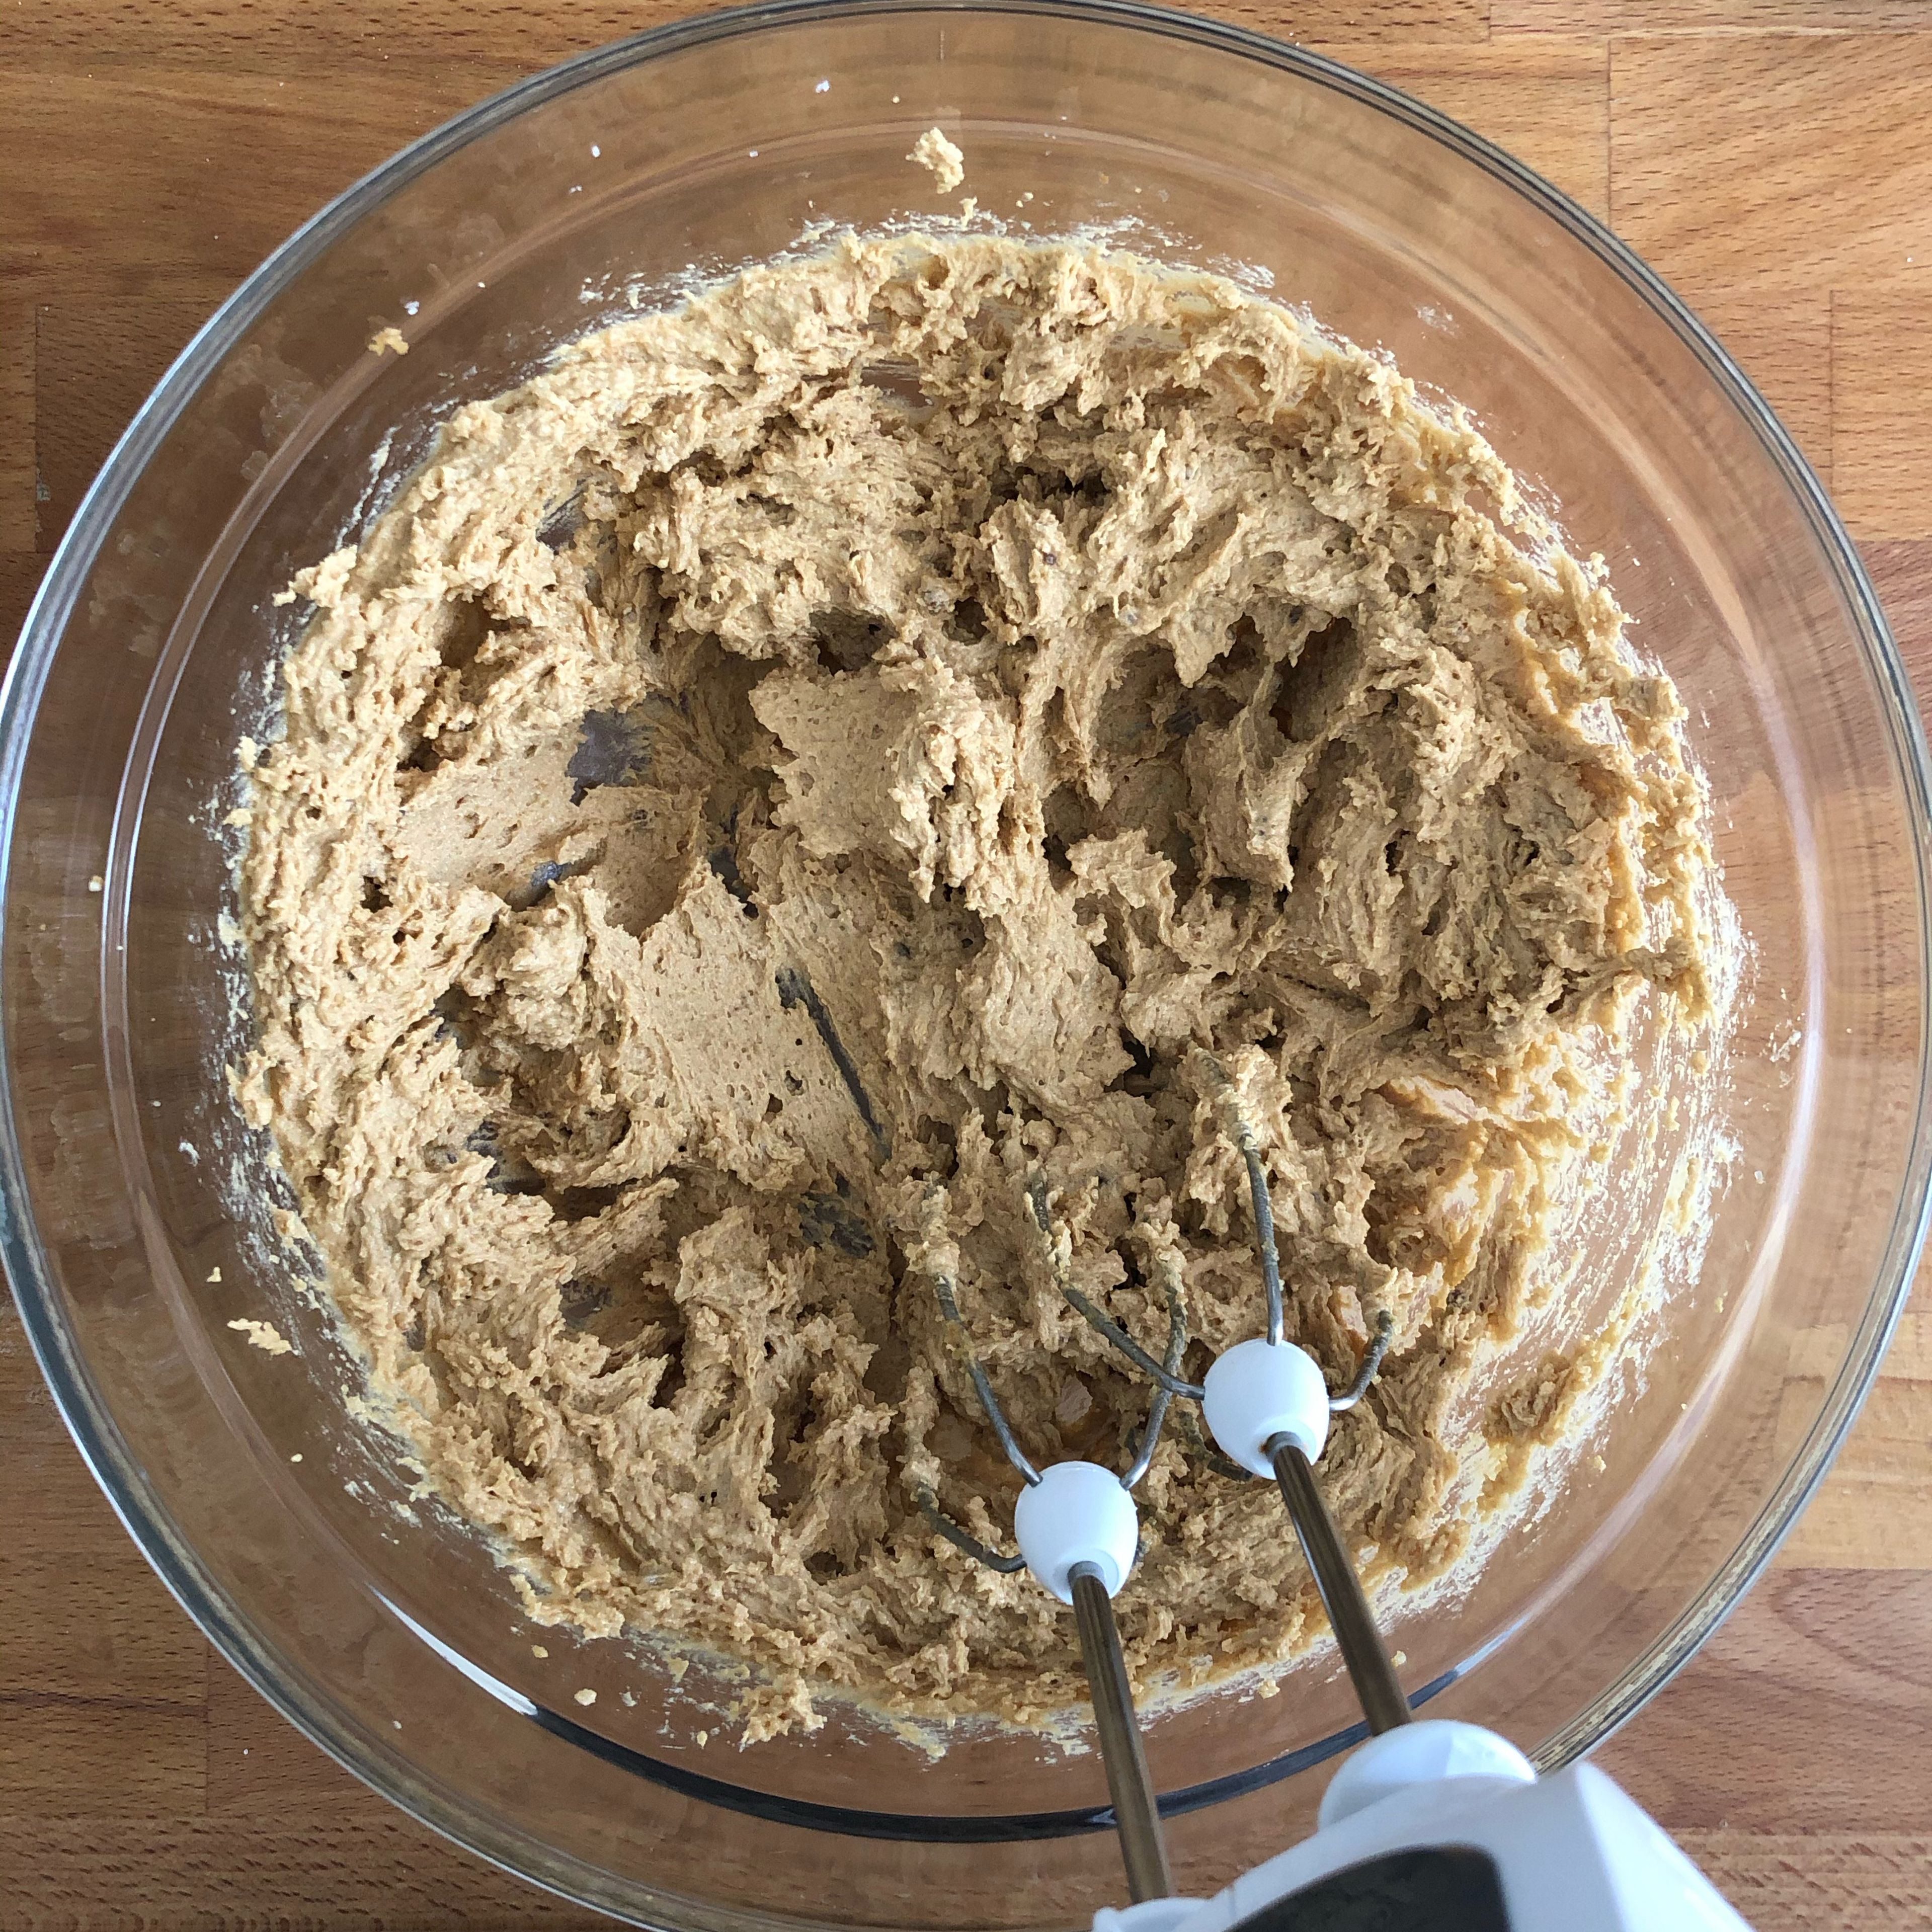 Add flour, baking soda, and baking powder a bowl and mix to combine, then set aside. Add butter, brown sugar, and sugar to a separate bowl and beat with a hand mixer until very light and fluffy, approx. 5 min.